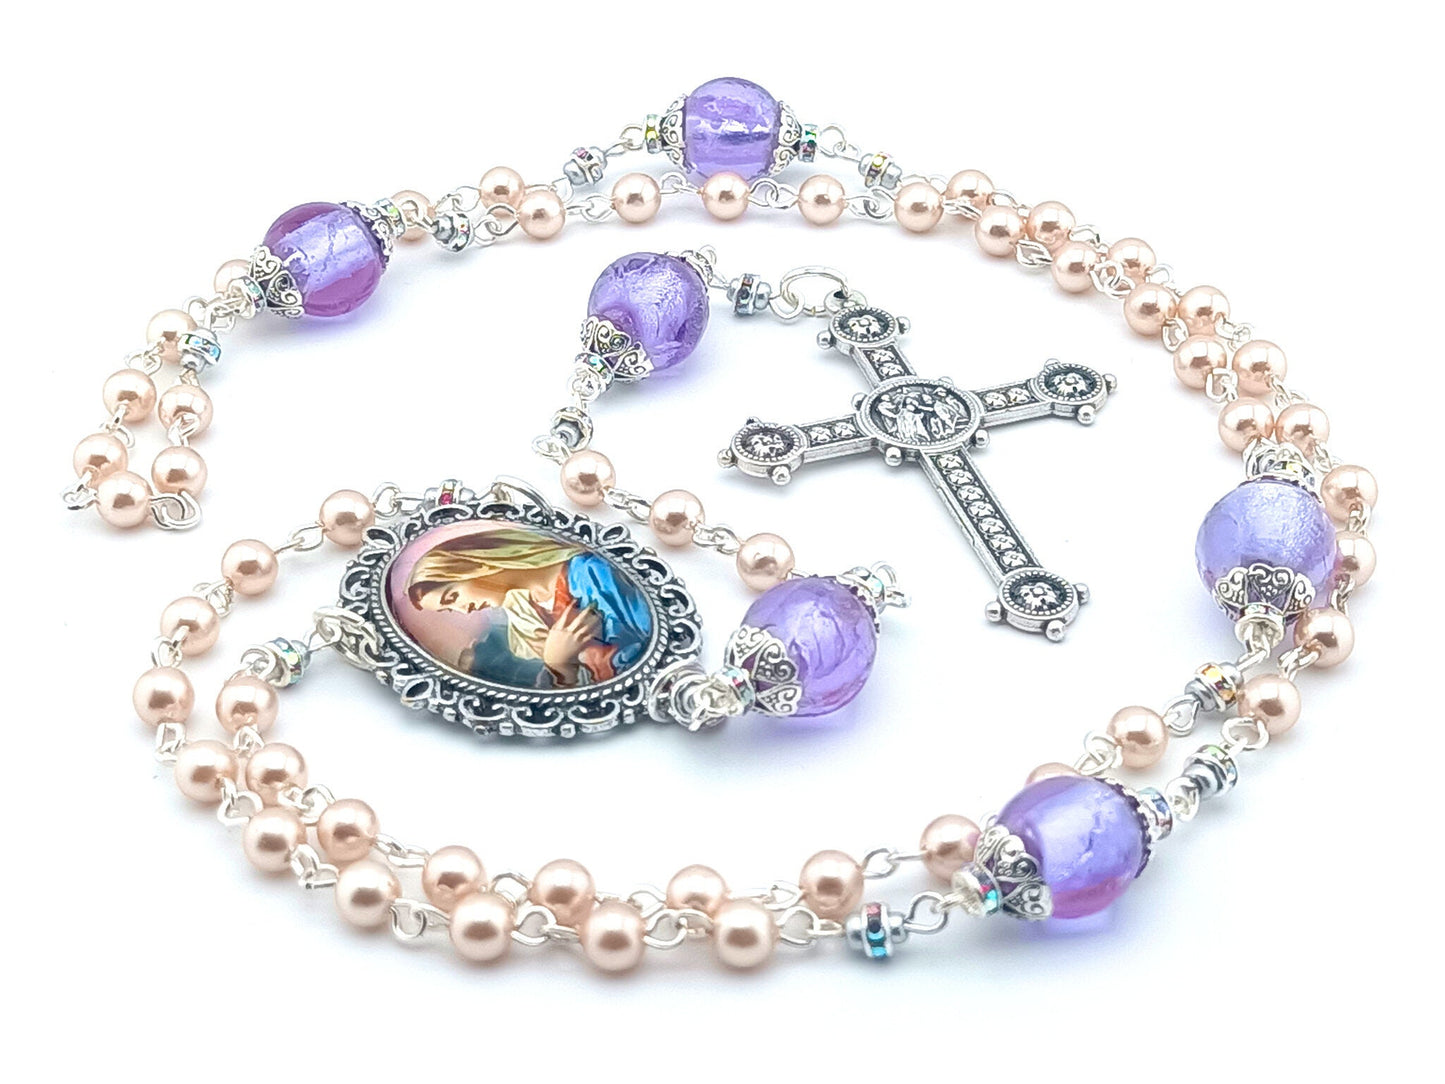 Our Ladys Fiat unique rosary beads with pink faux pearl and large lilac glass beads, Ferula cross and large picture centre medal.